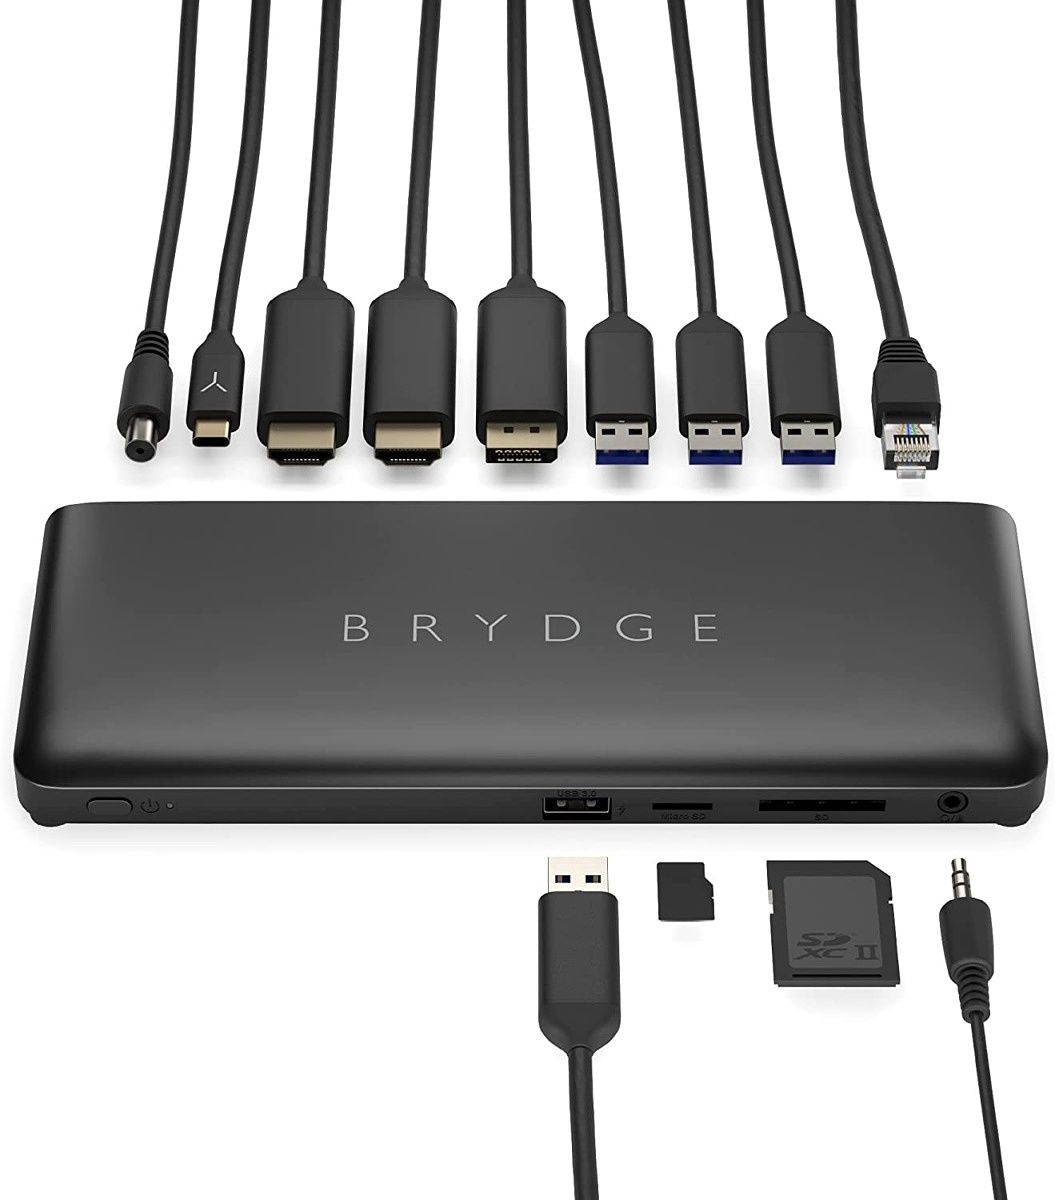 Thunderbolt is great, but it's also expensive. This Brydge dock uses a standard USB-C connection, but it still has a ton of ports for your peripherals, including three display outputs, USB Type-A, and gigabit Ethernet. Plus, it looks sleek.